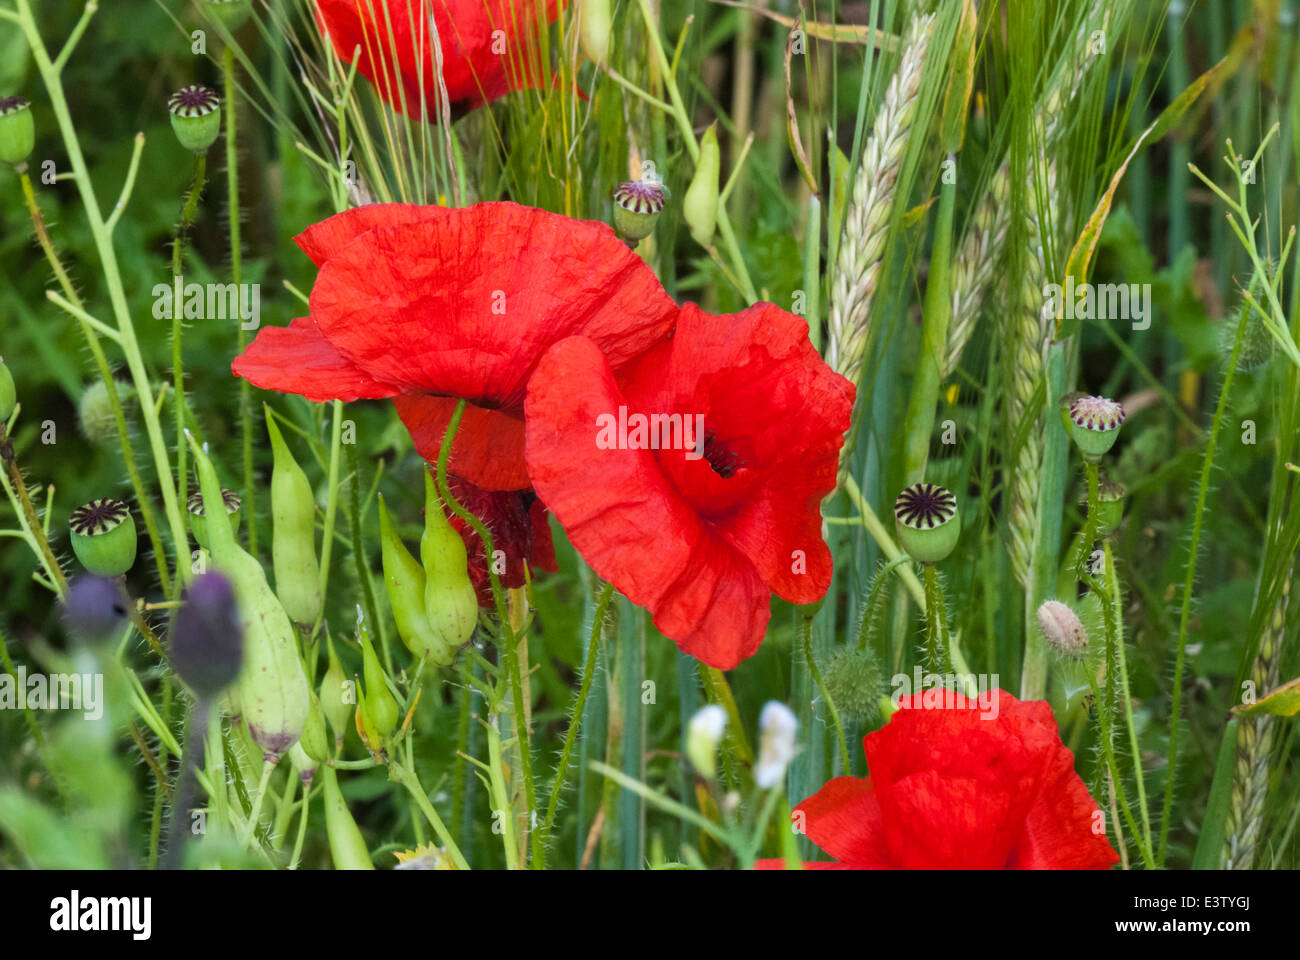 Poppies, Papaveroideae, in the Hedgerow Stock Photo